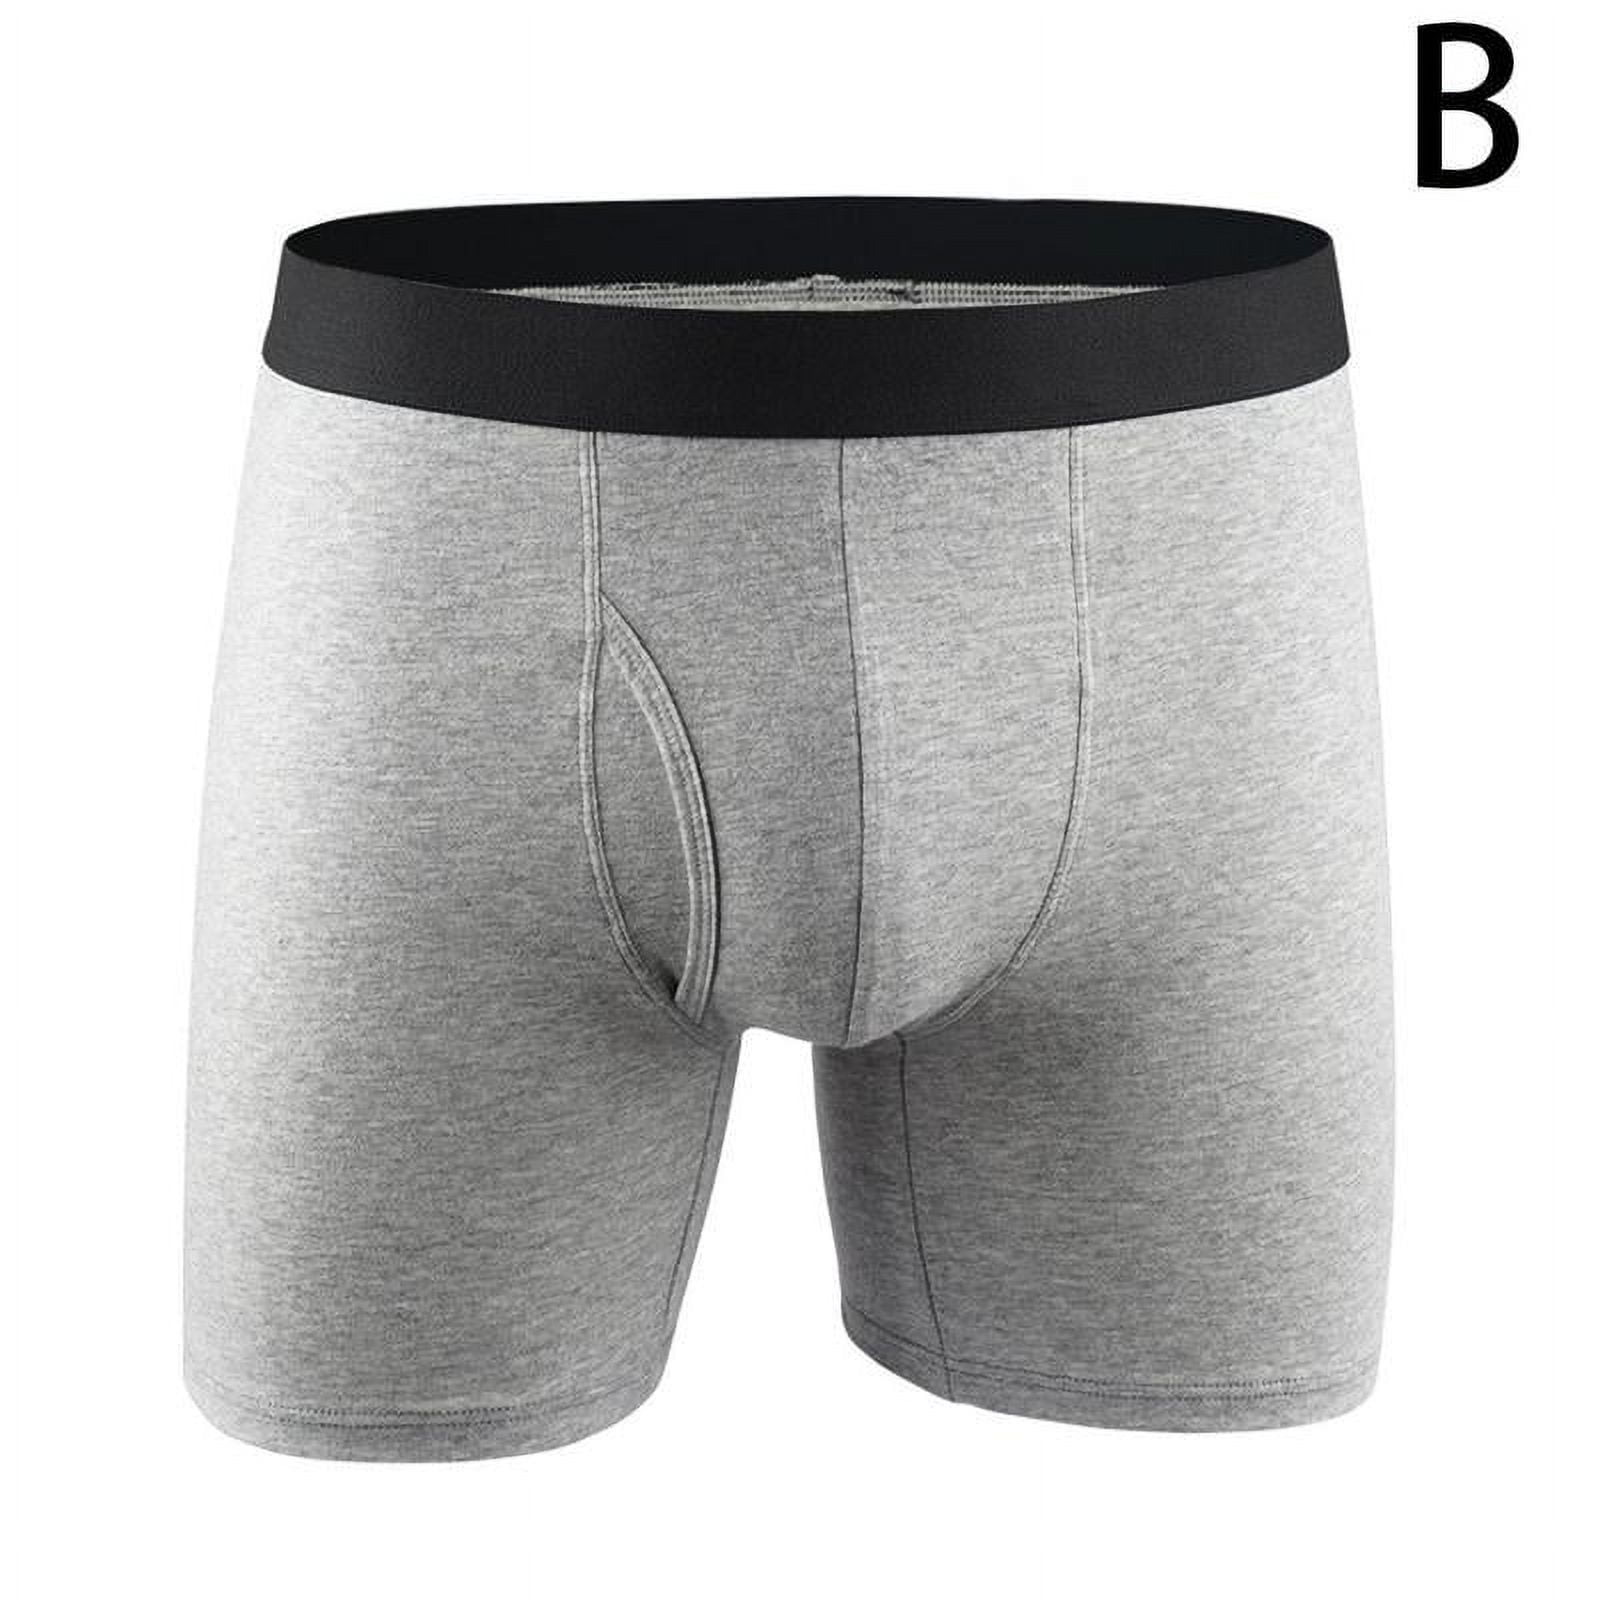 Solid Color Boxer Briefs Oil Shiny Glossy Gym Shorts Leggings Trunks High  Waist Elastic Seamless Boxers Panties For Women Men